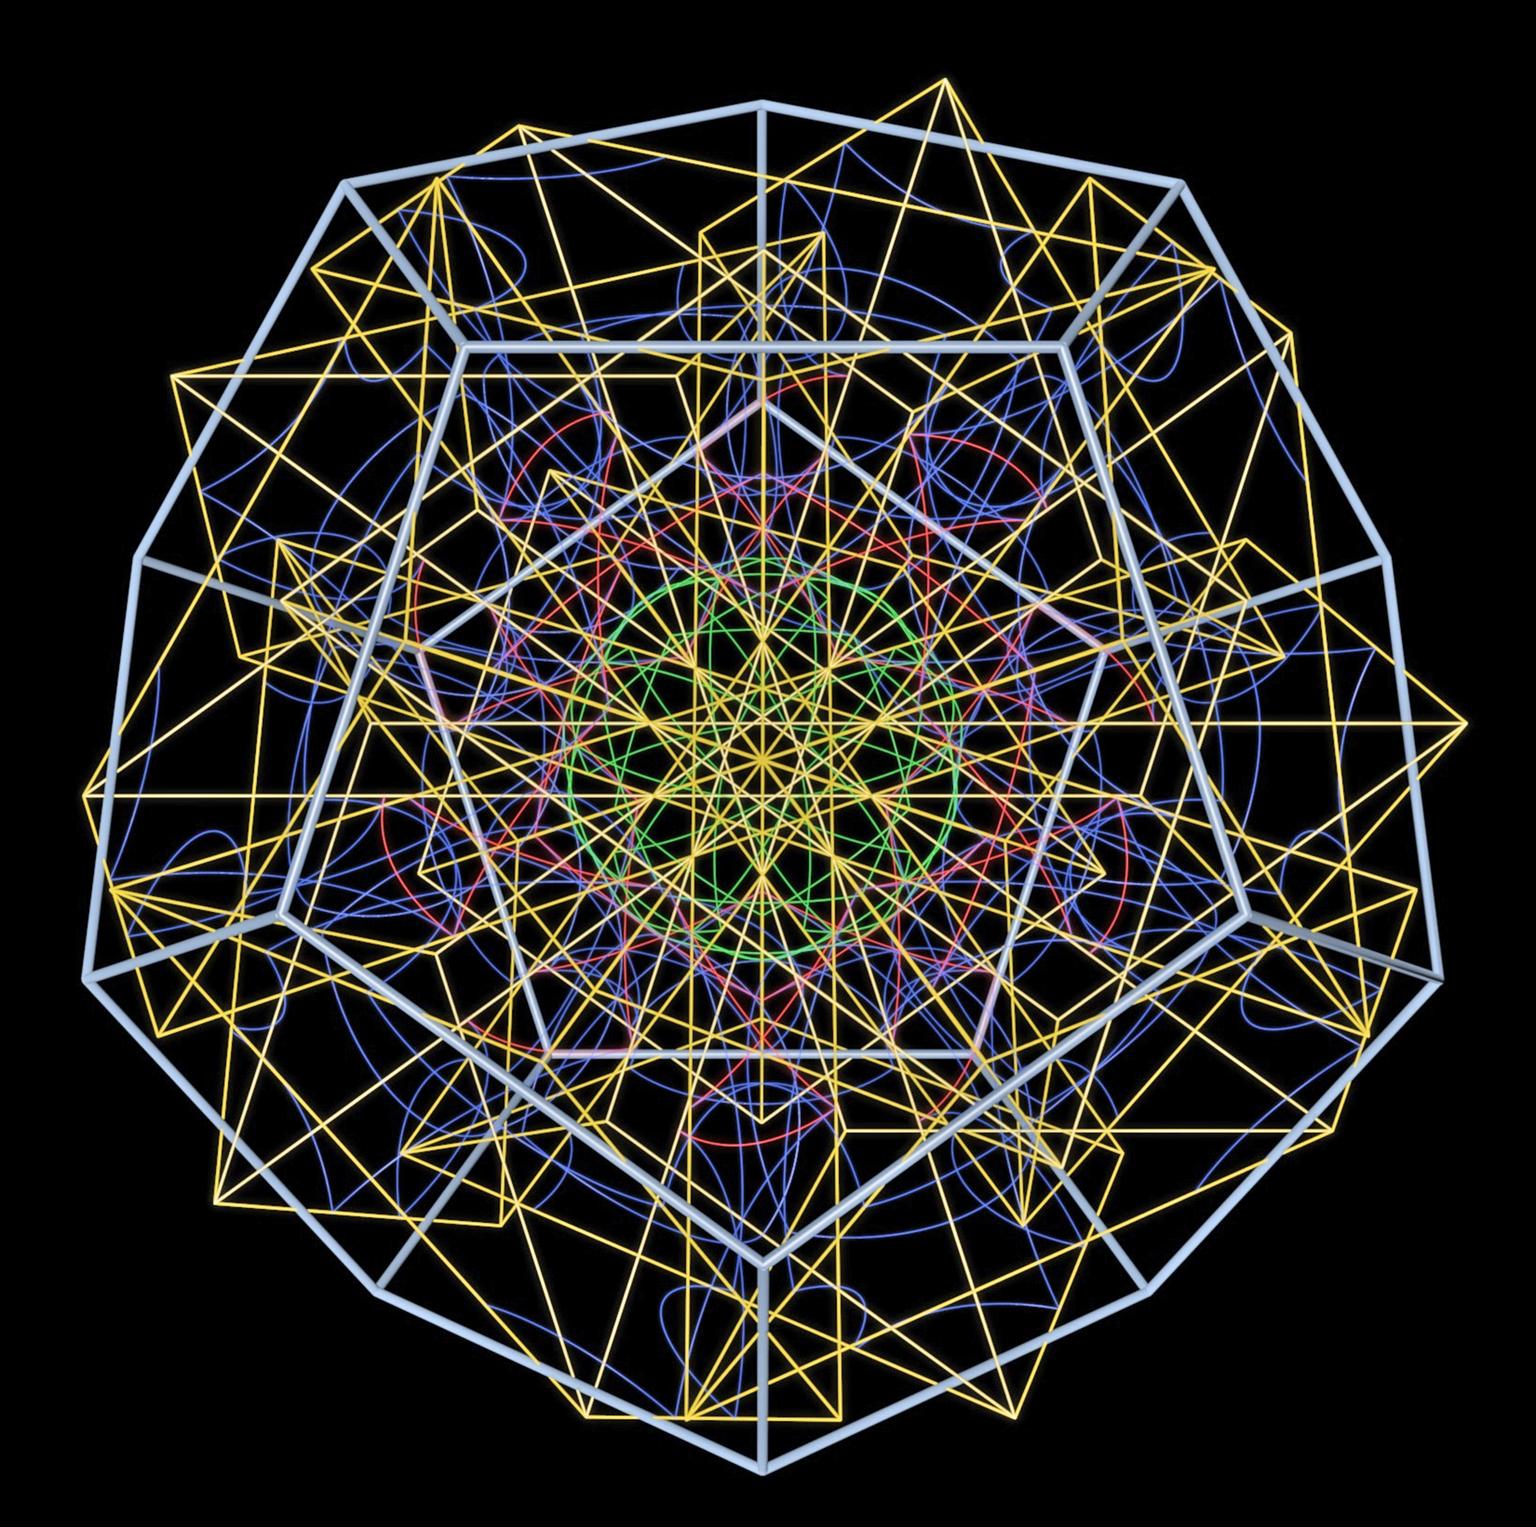 Image for entry 'Twisted Epita-dodecahedron'